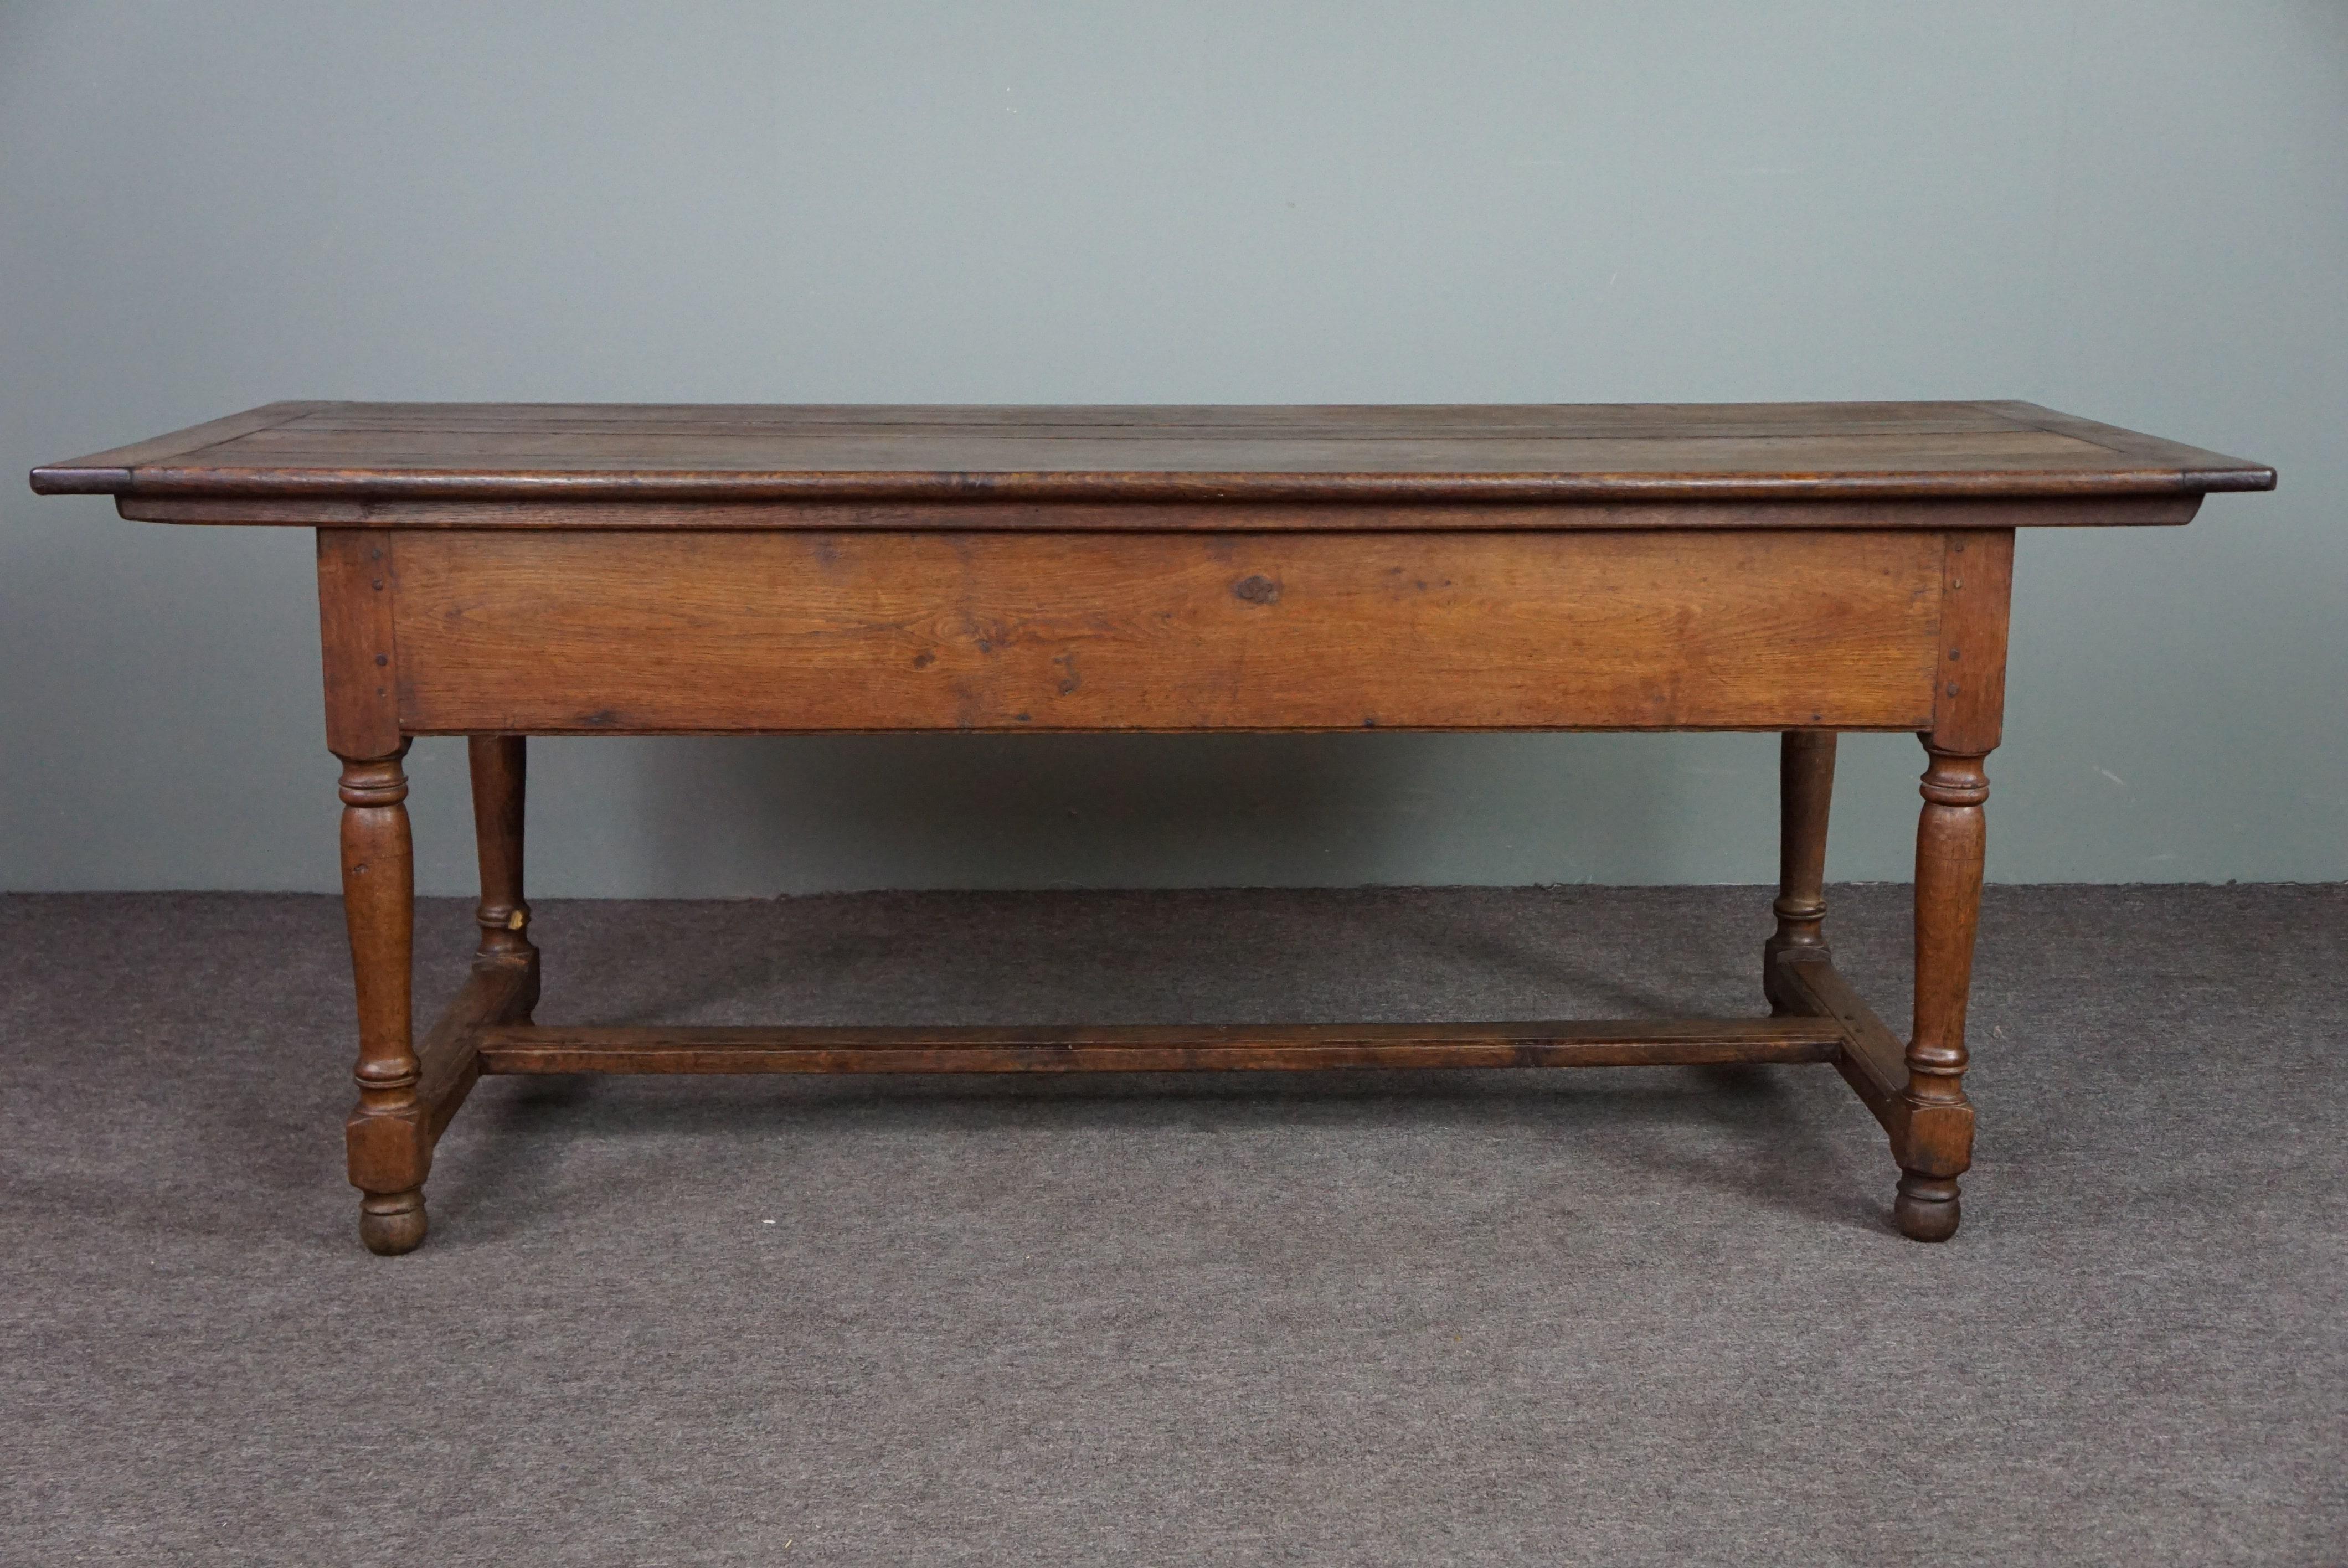 Hand-Crafted Antique side table/sideboard with storage space under the top For Sale